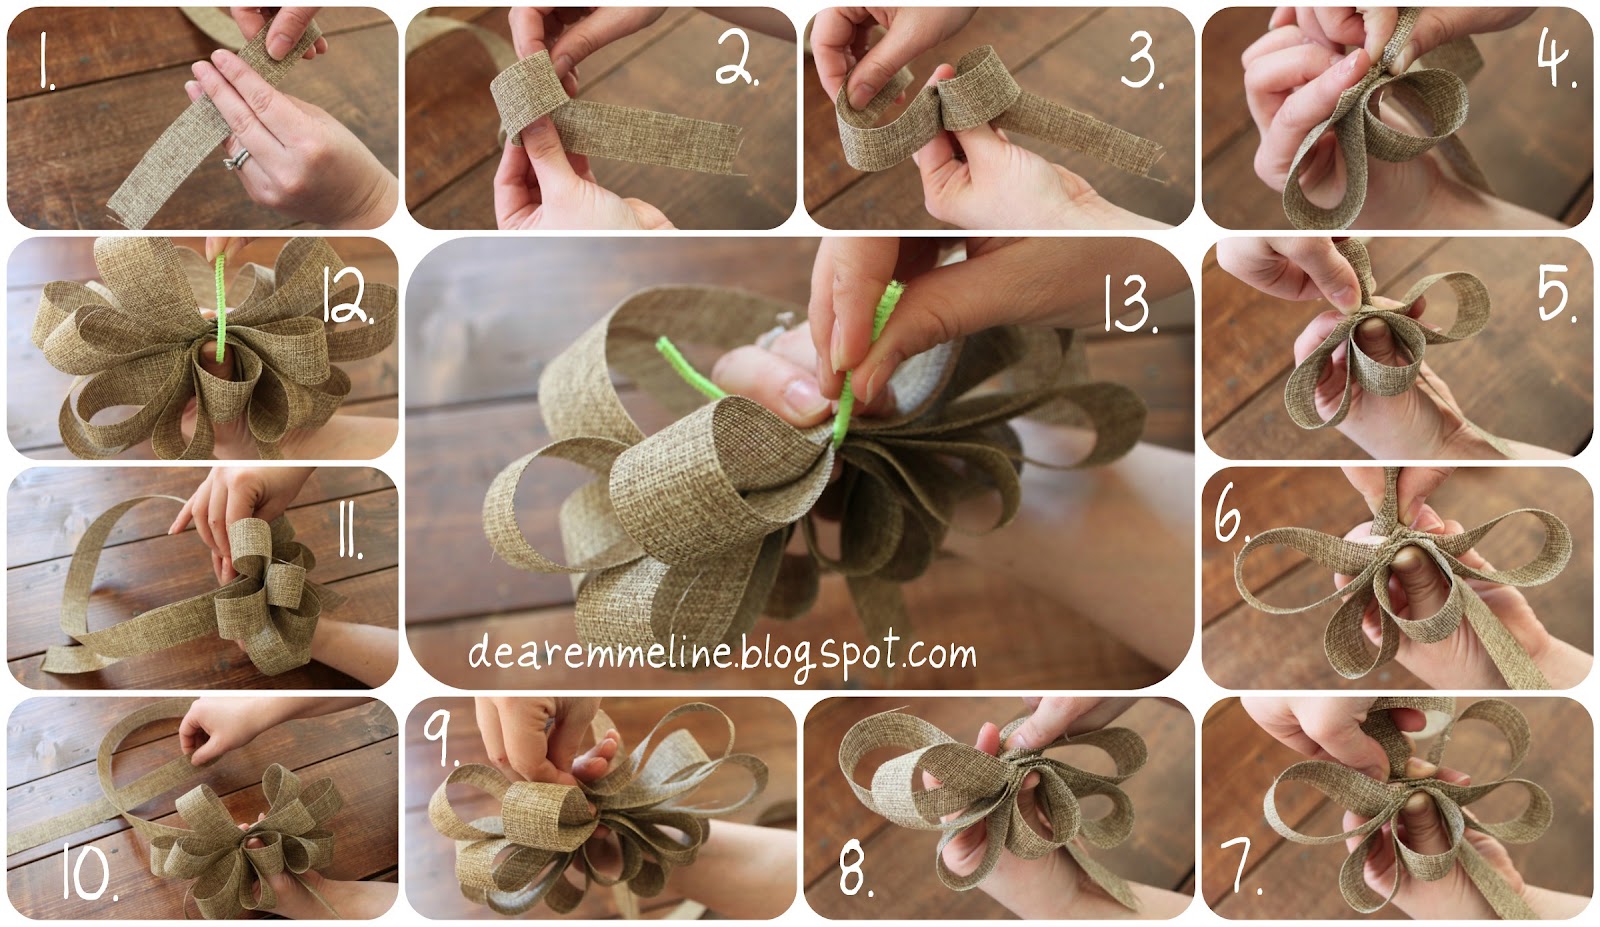 How to make easy DIY bows and wreaths – Bowdabra Tutorial